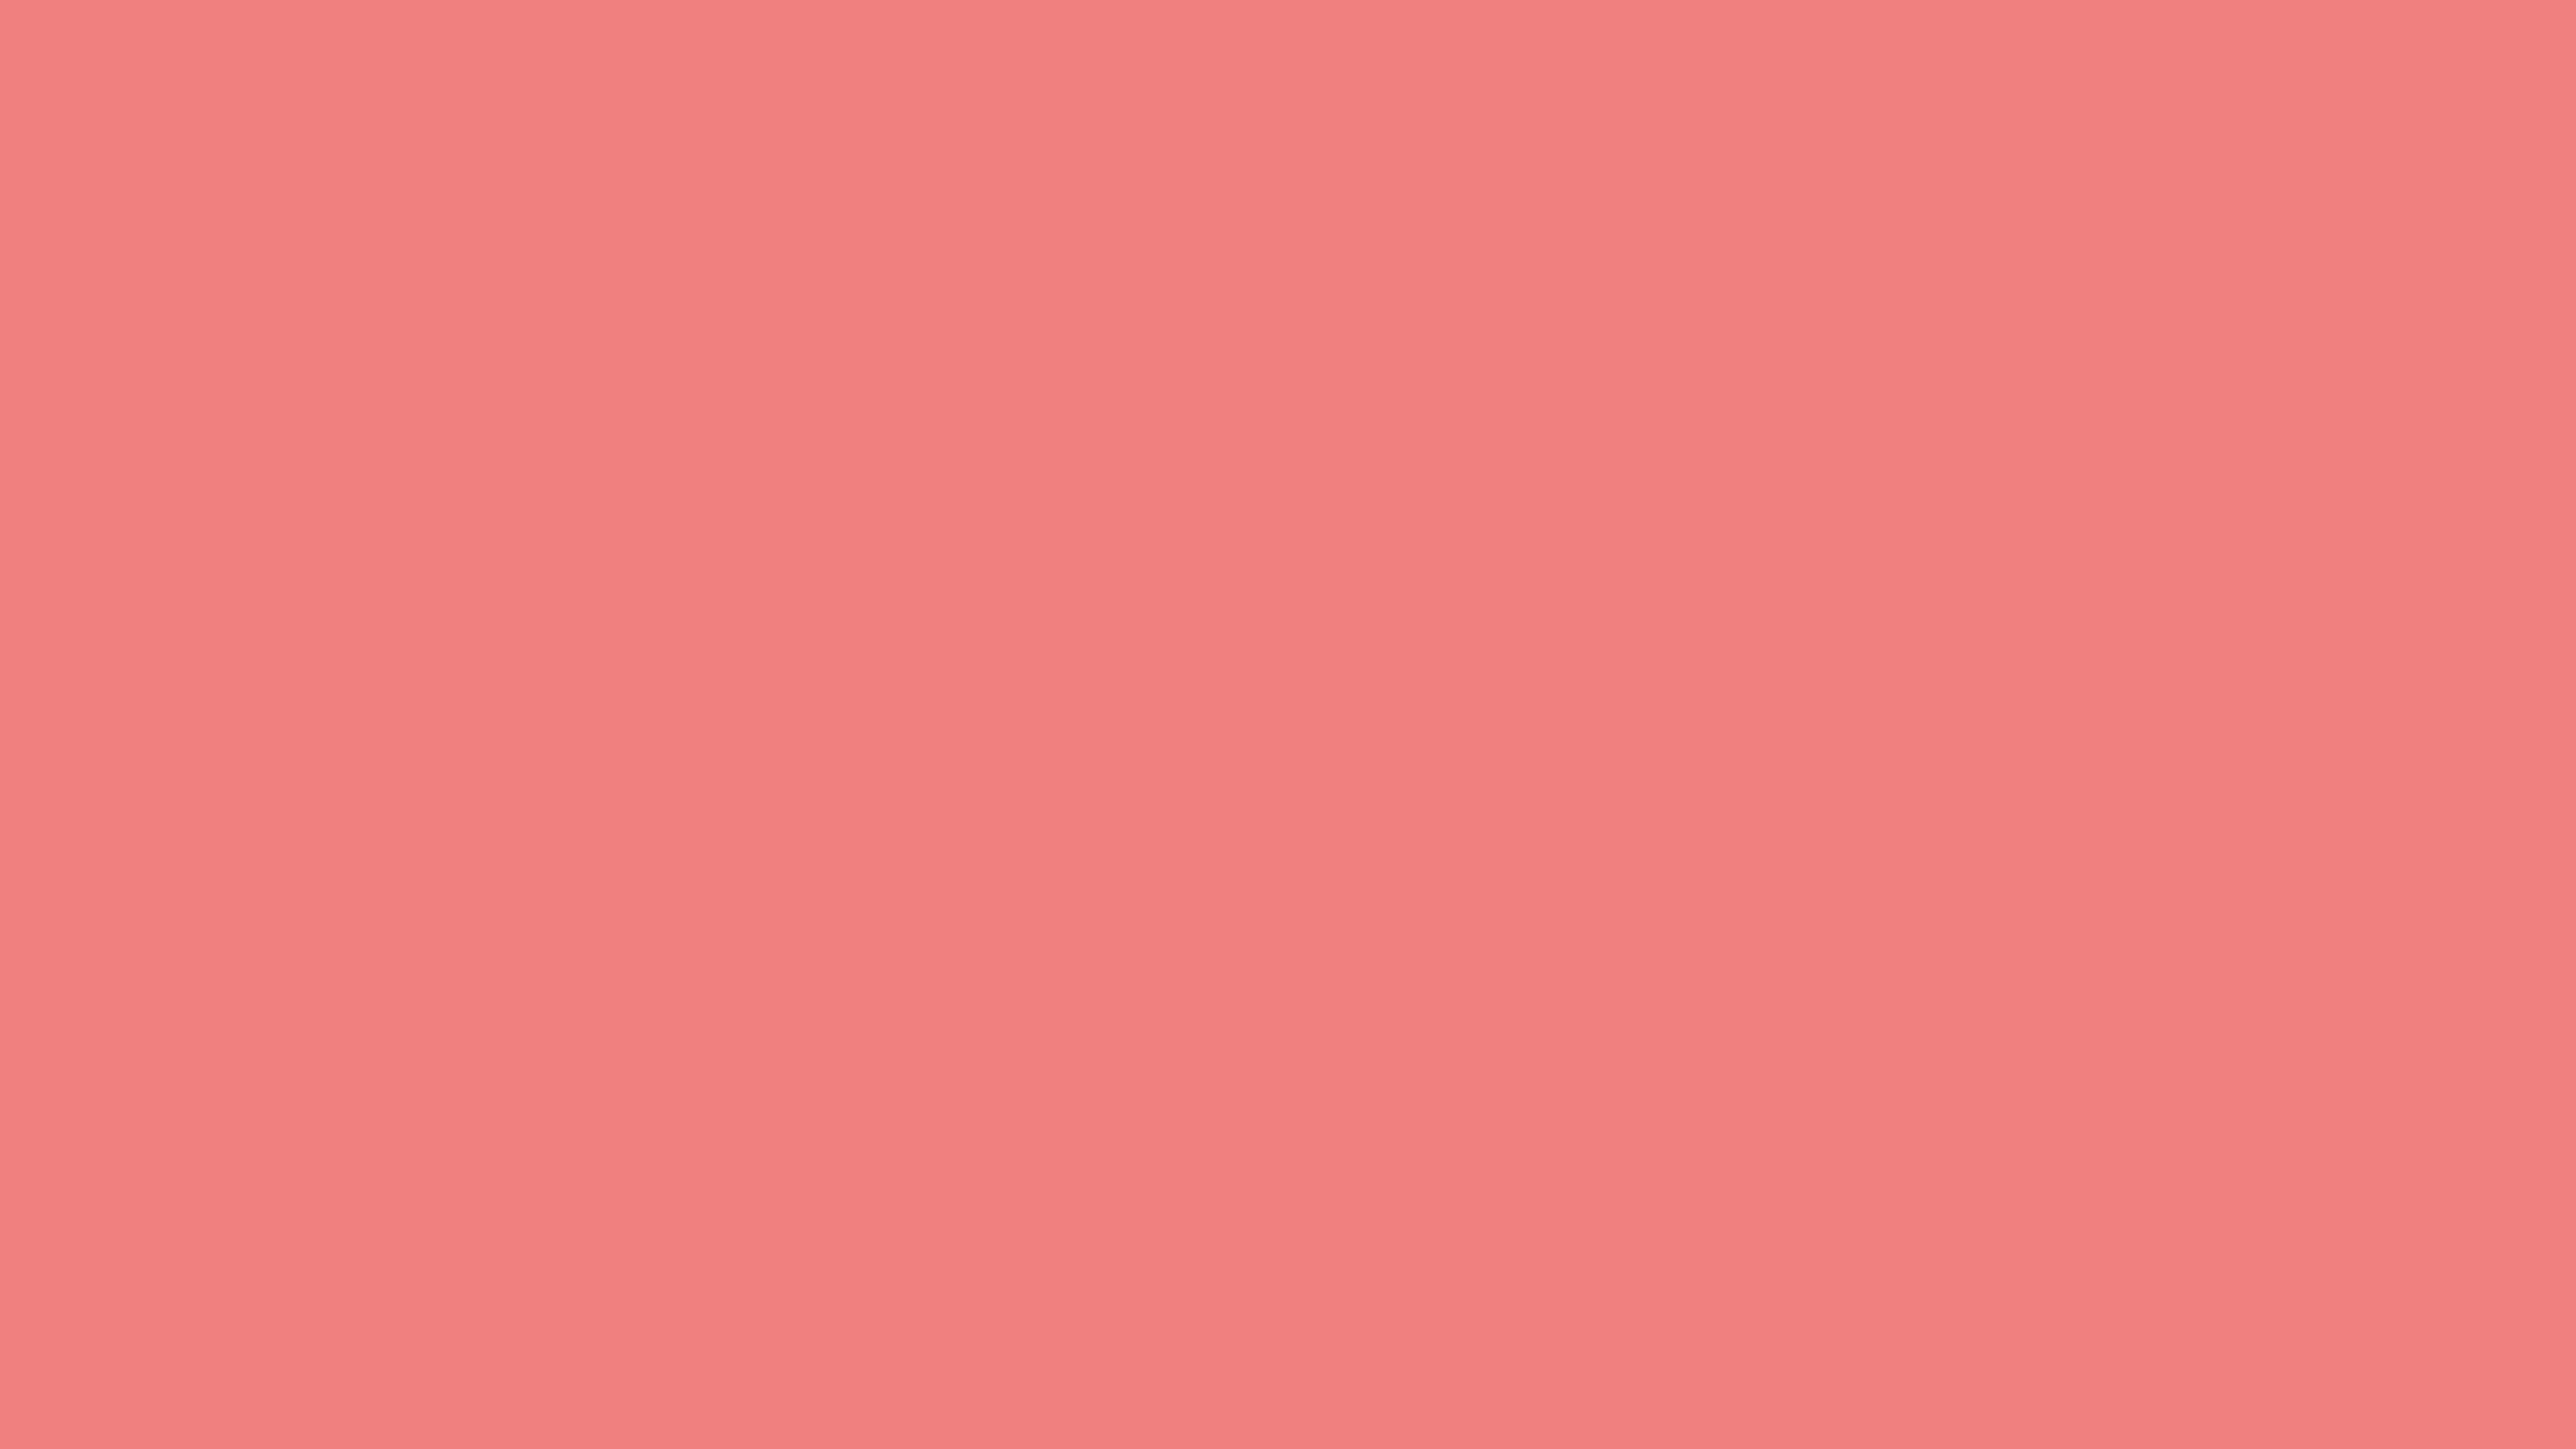 3840x2160 Light Coral Solid Color Background